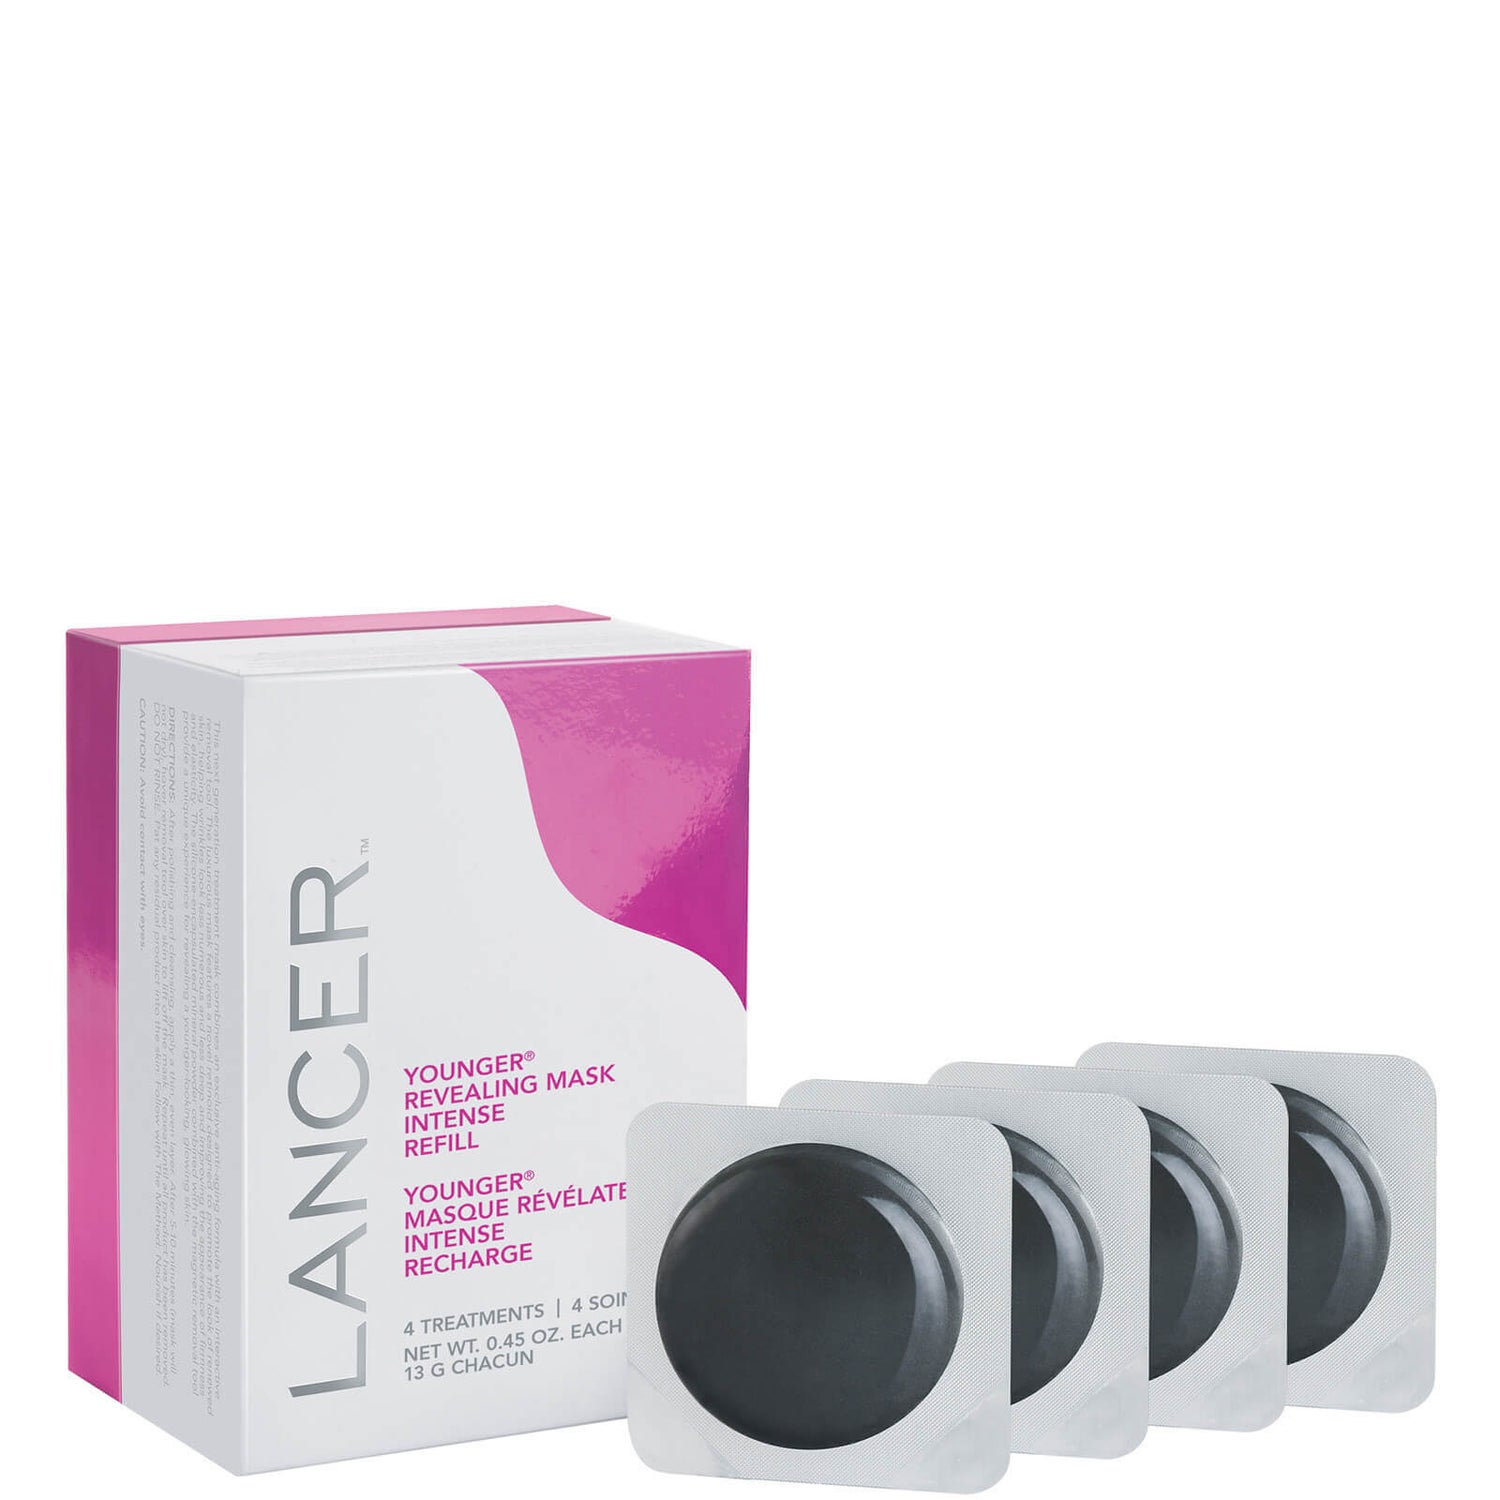 Lancer Skincare Younger Revealing Mask Intense Refill (4 count)